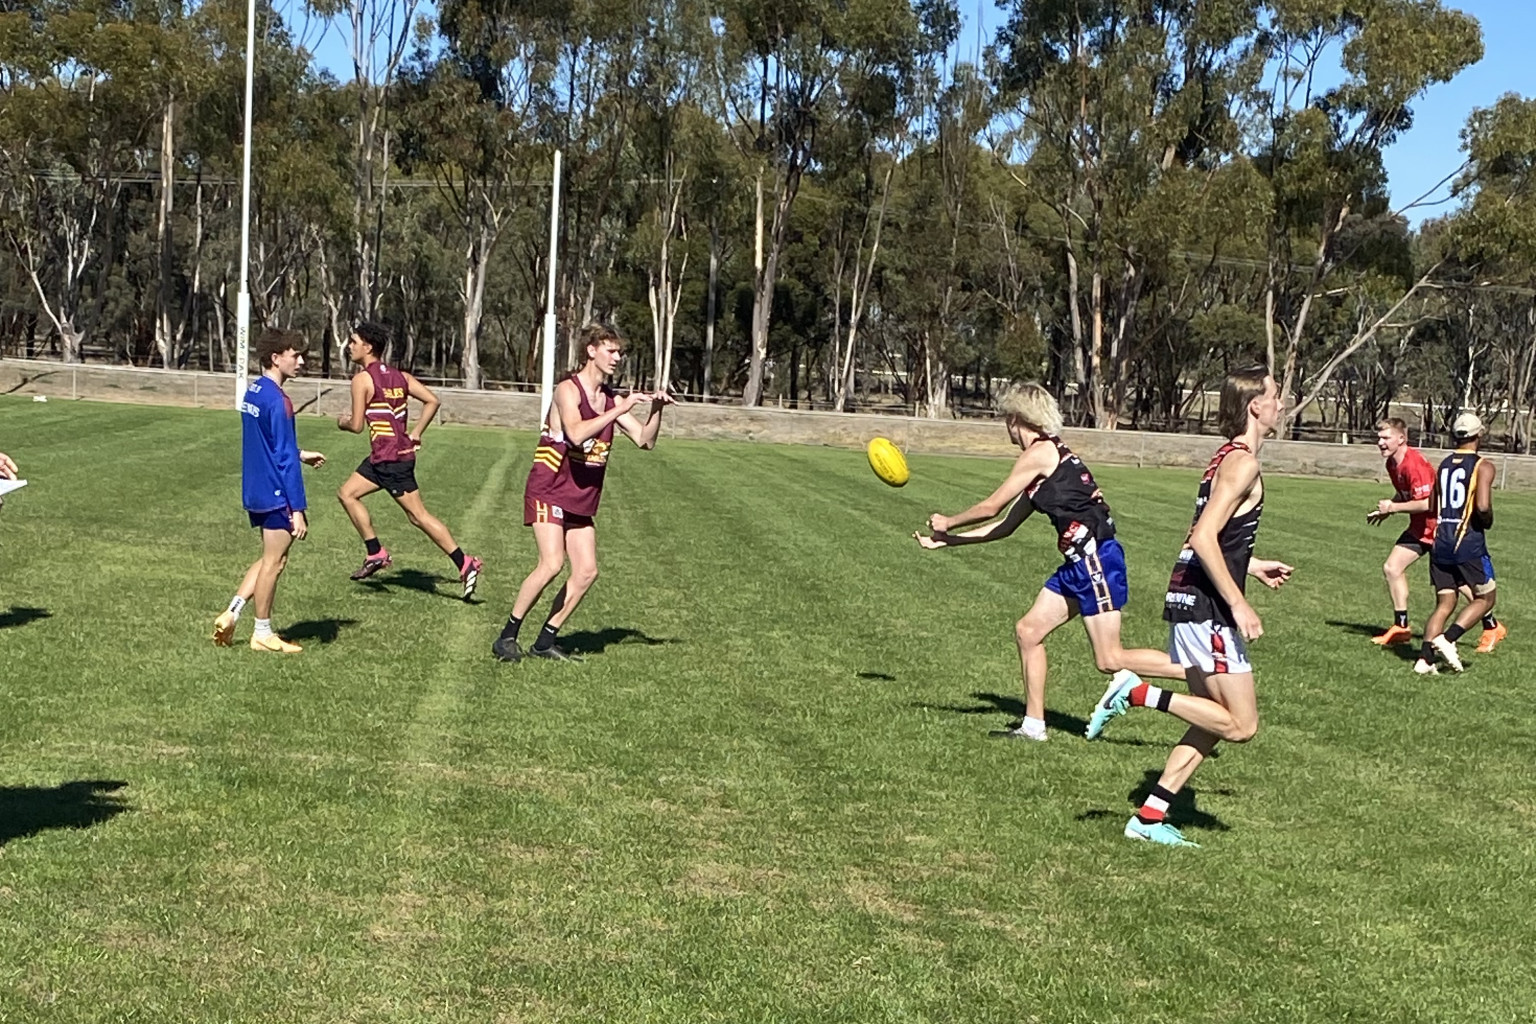 The juniors hard at training in great conditions.